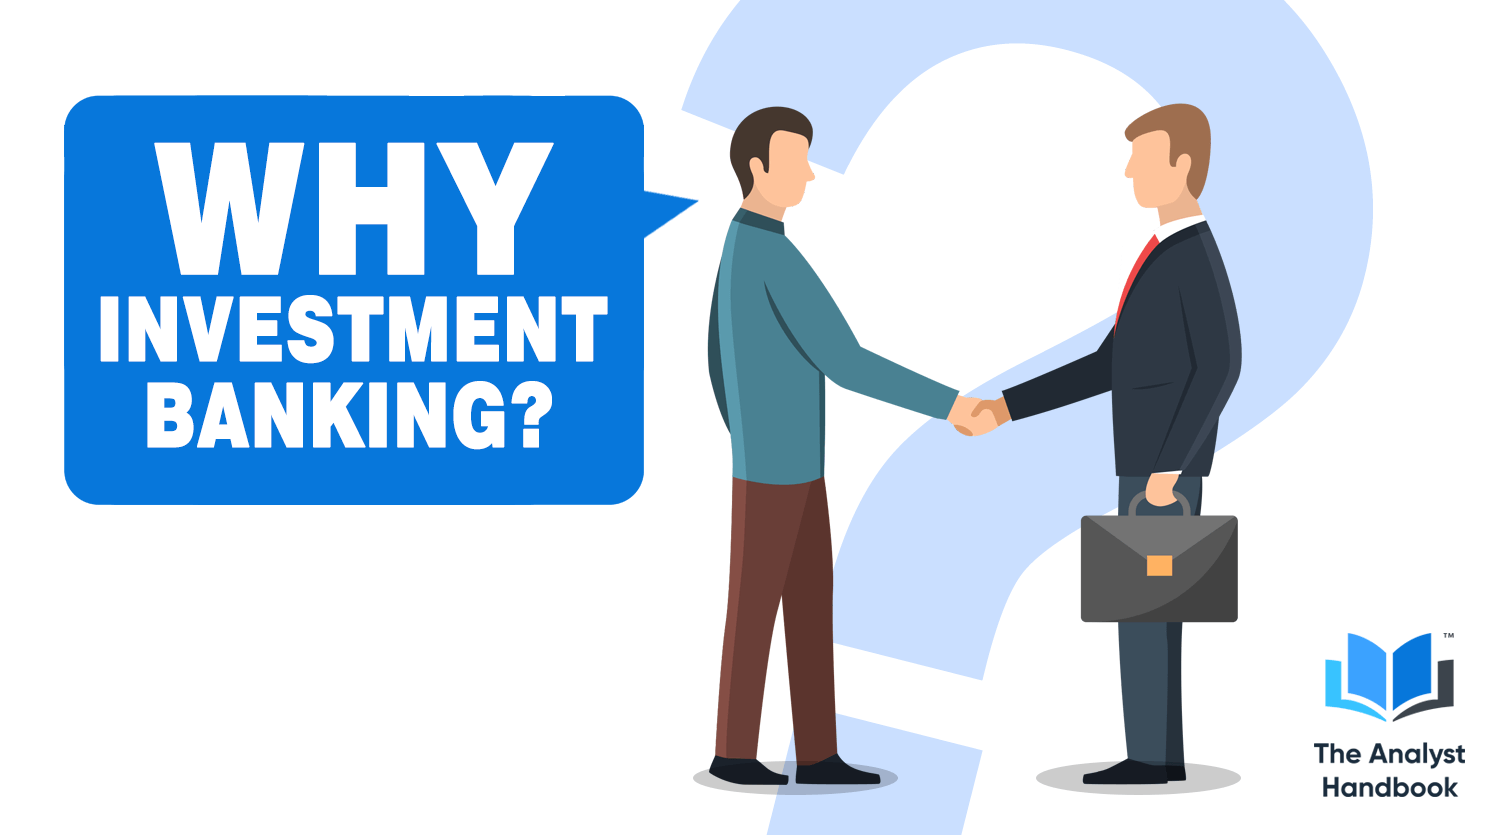 Why Investment Banking? 10 Ways To Answer The Interview Question